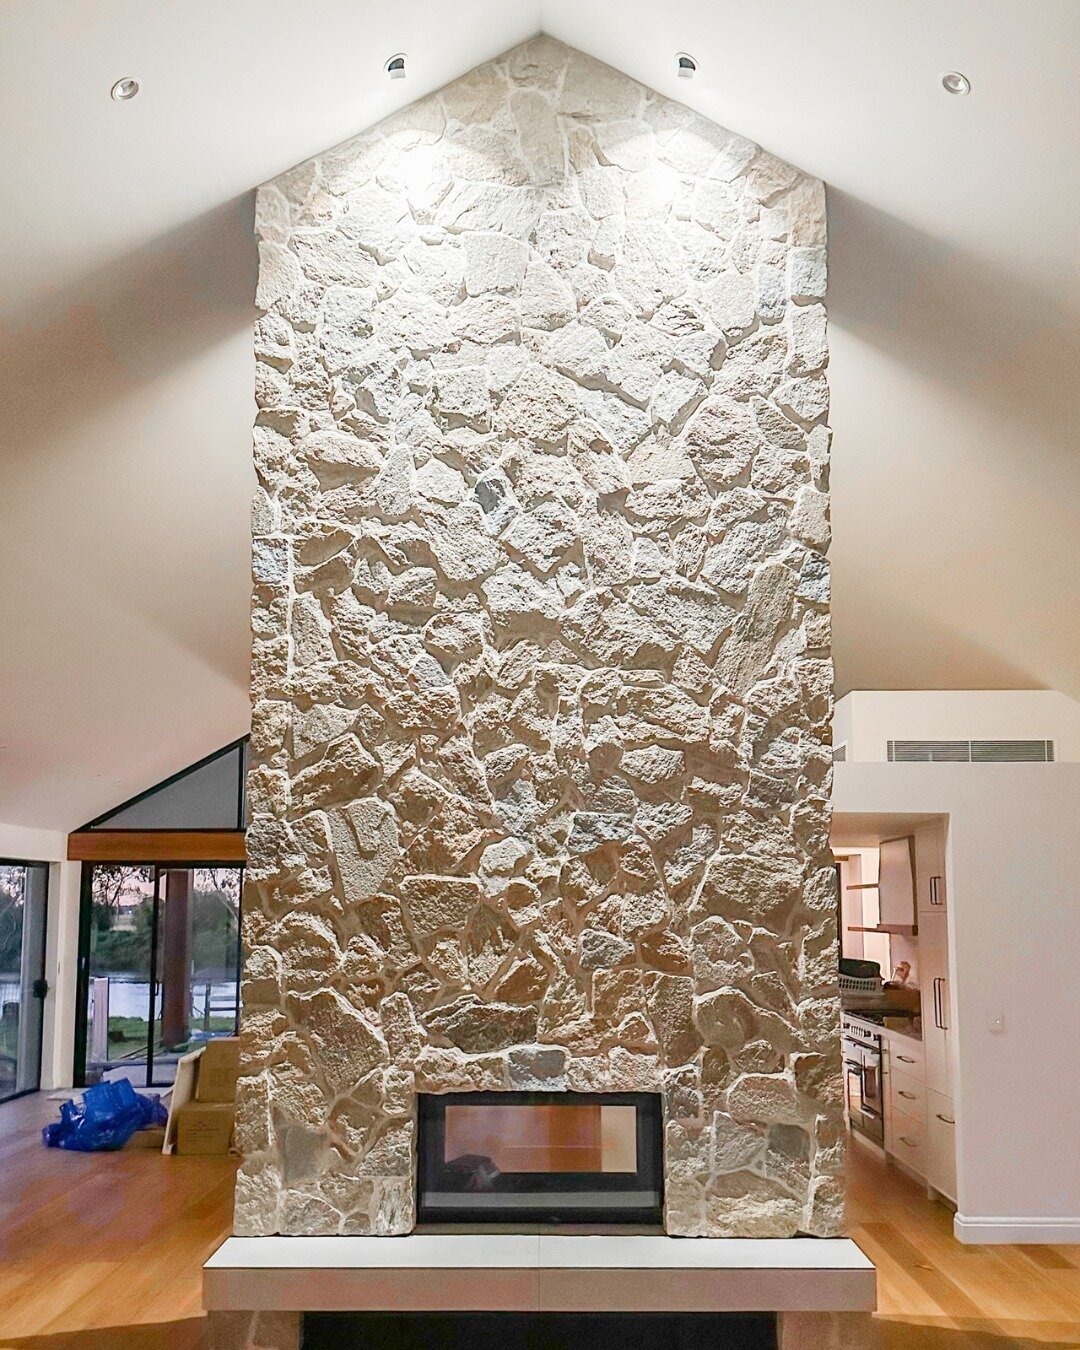 Exciting progress at our Hinton Build! 🤩

We've just installed these feature lights throughout the hallway, creating a warm and inviting atmosphere. And that's not all - we've also added lighting to highlight the beautiful hand-built stone chimney, 